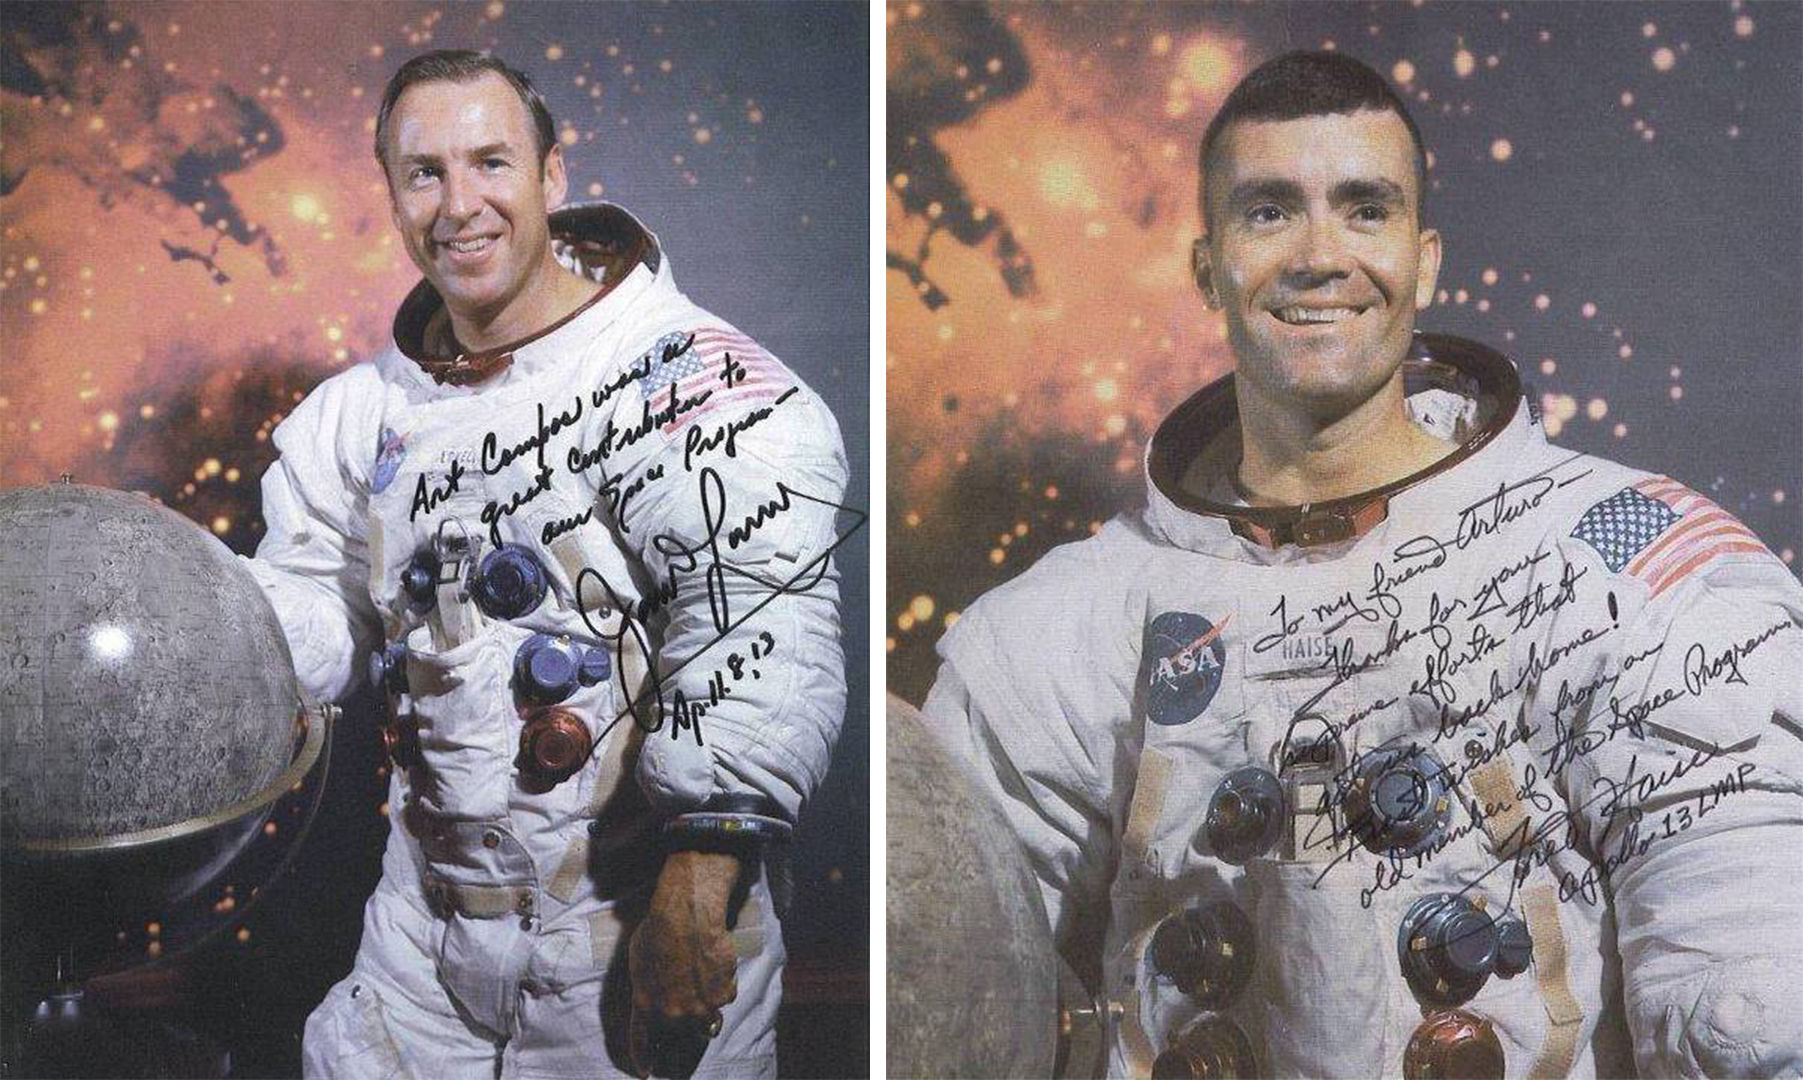 Autographed pictures of Apollo 13 astronauts Jim Lovell and Fred Haise, addressed to Arturo Campos